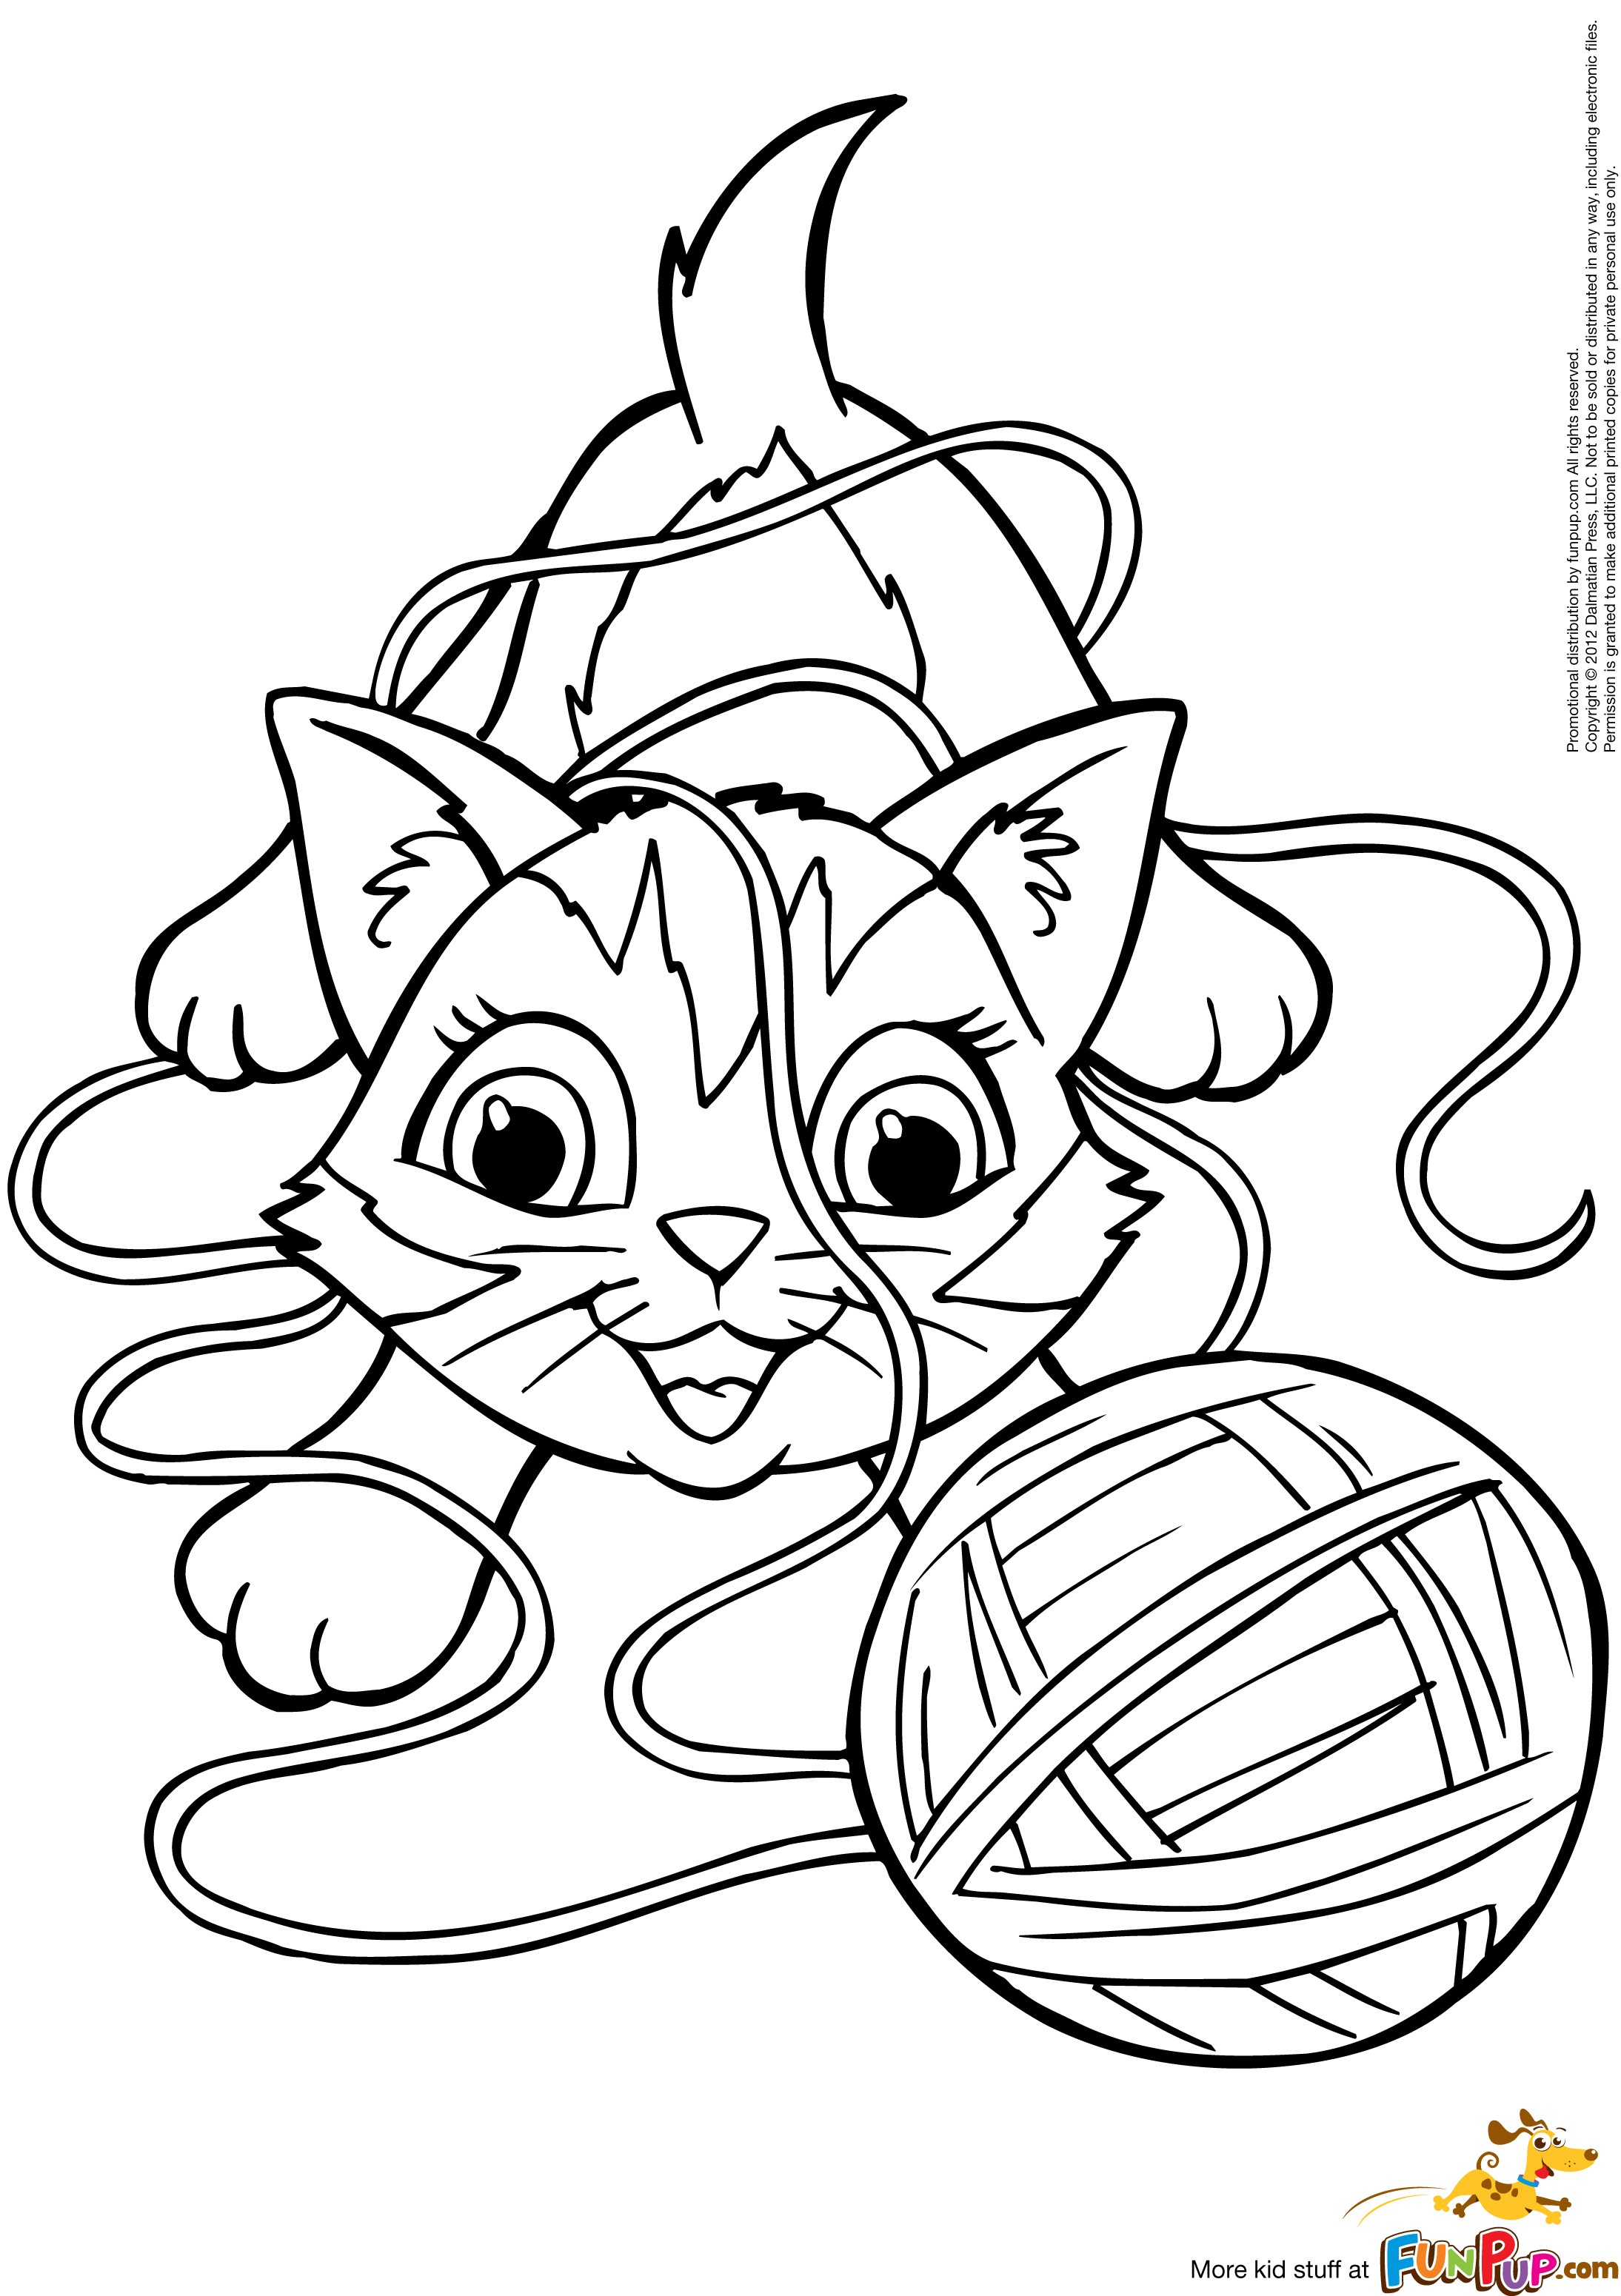 Yarn black and white clipart